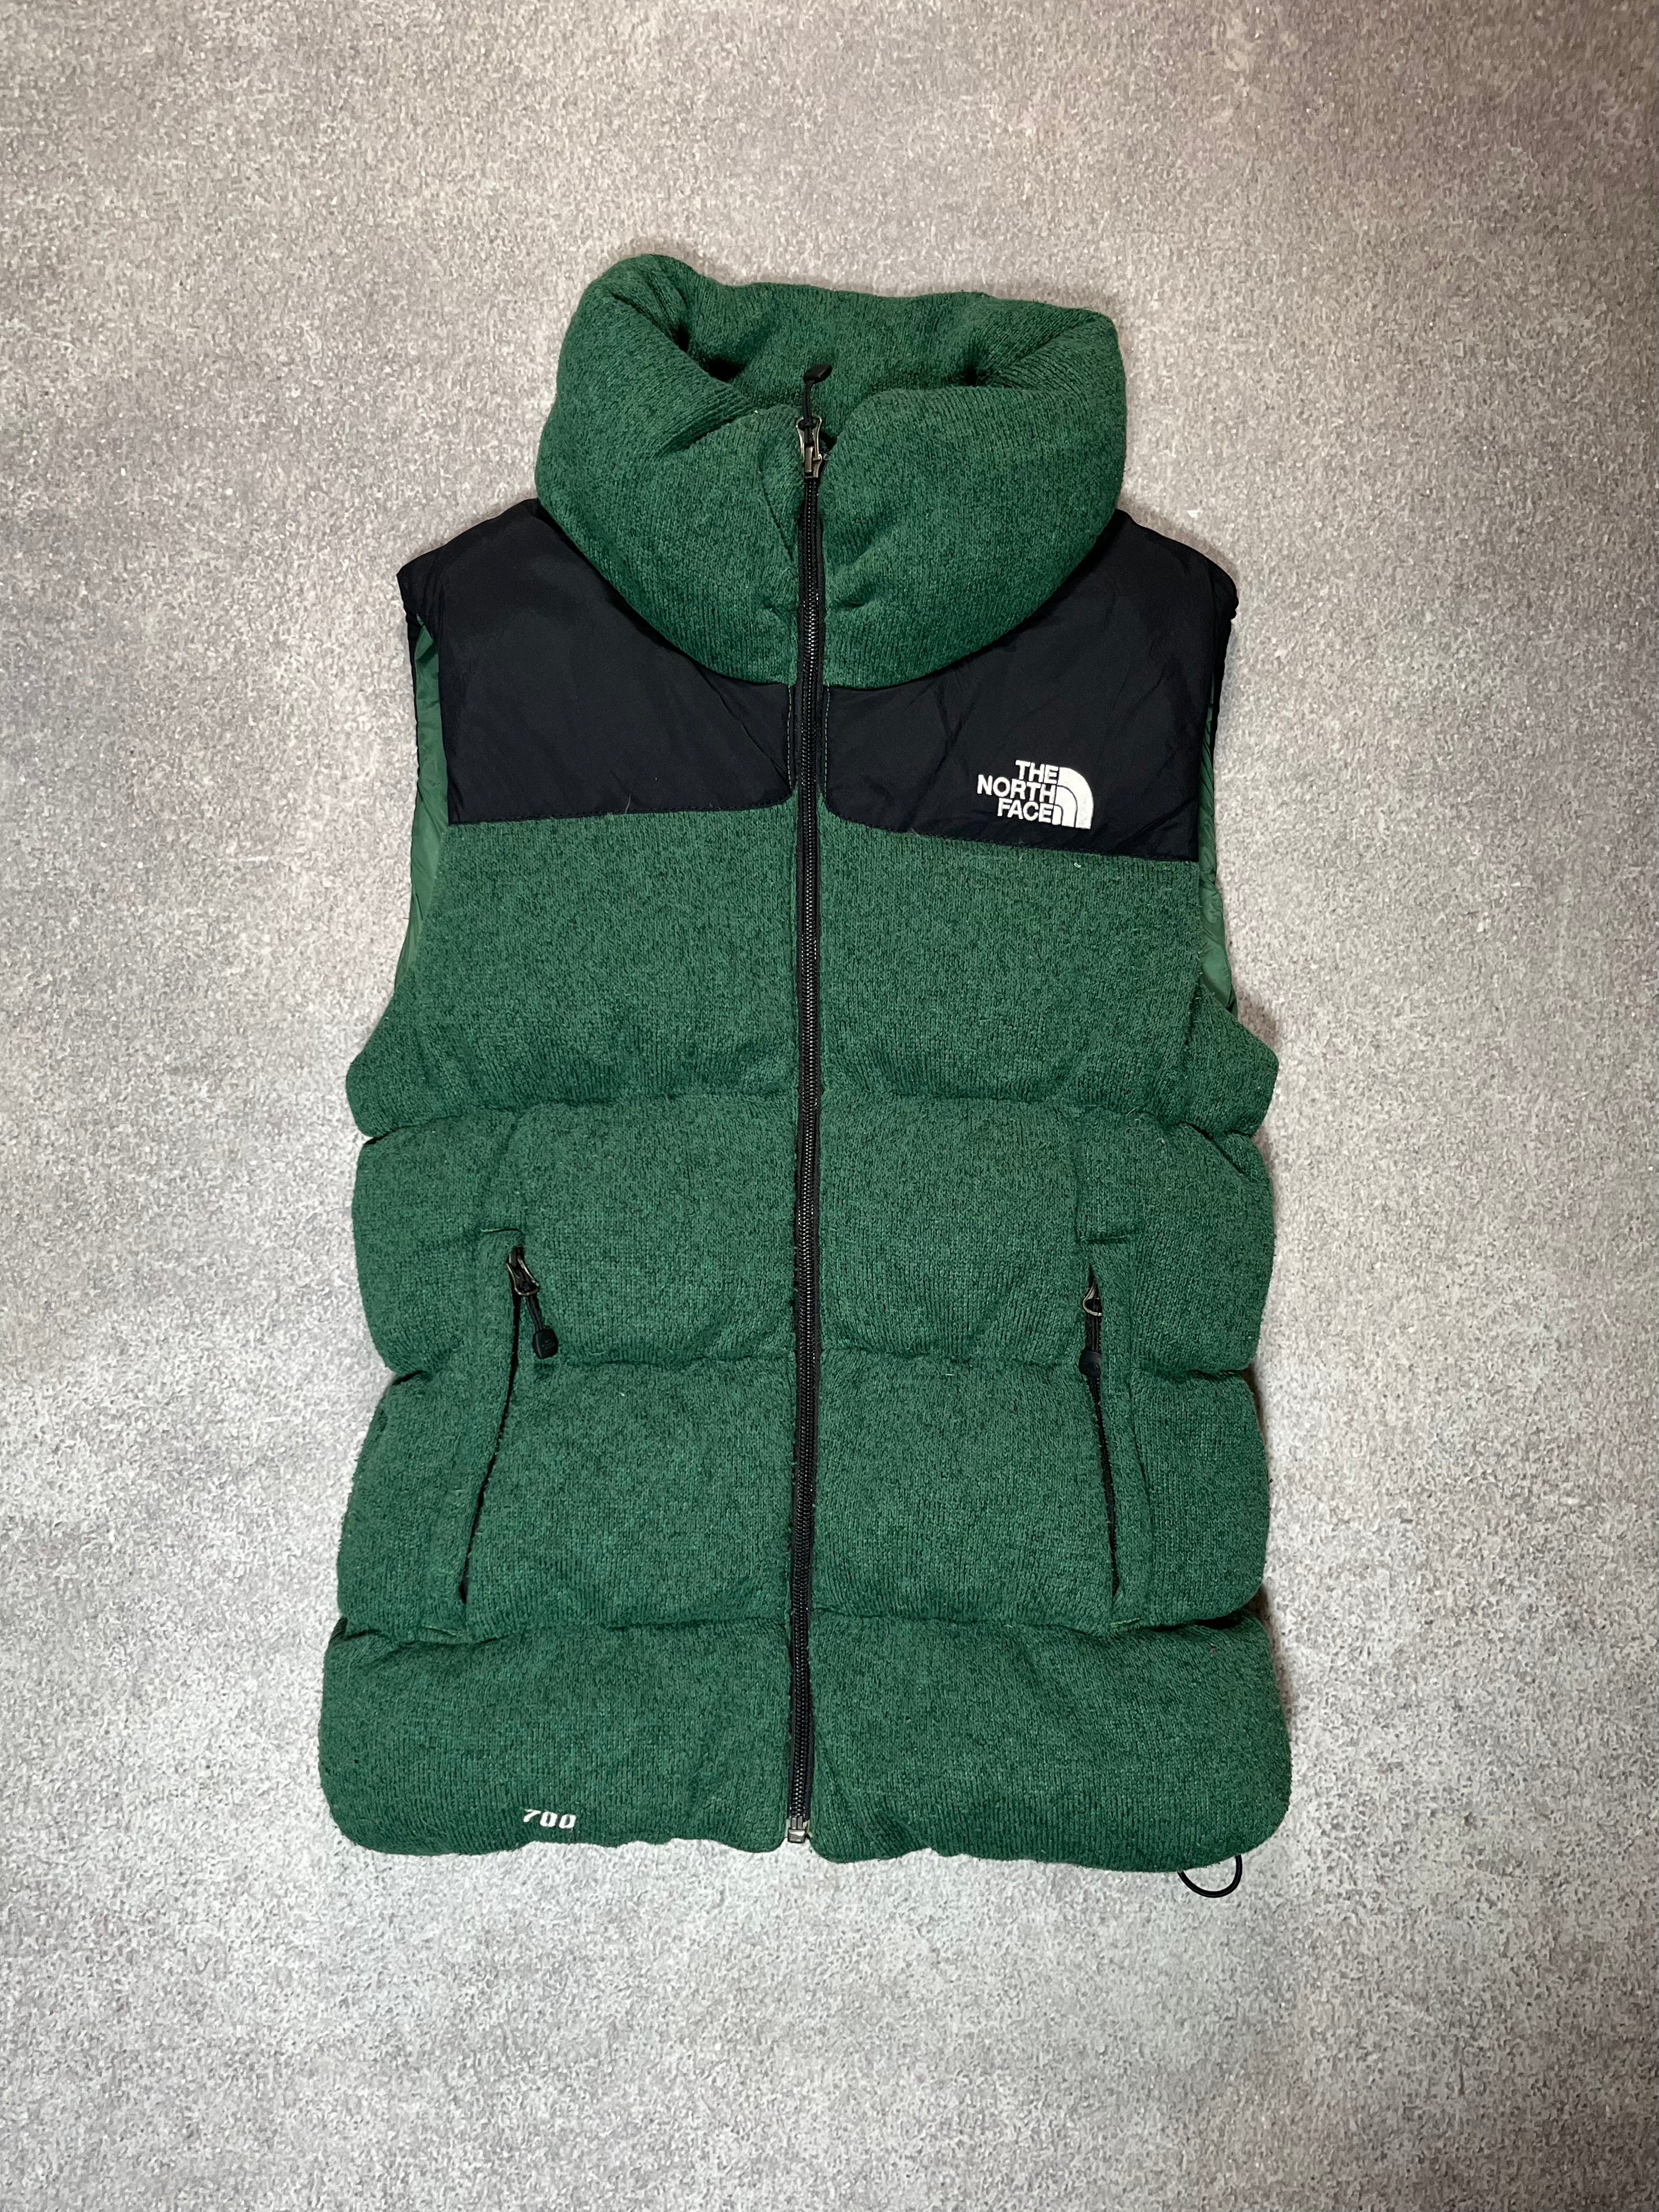 The North Face 700 Puffer Vest Green // Small - RHAGHOUSE VINTAGE